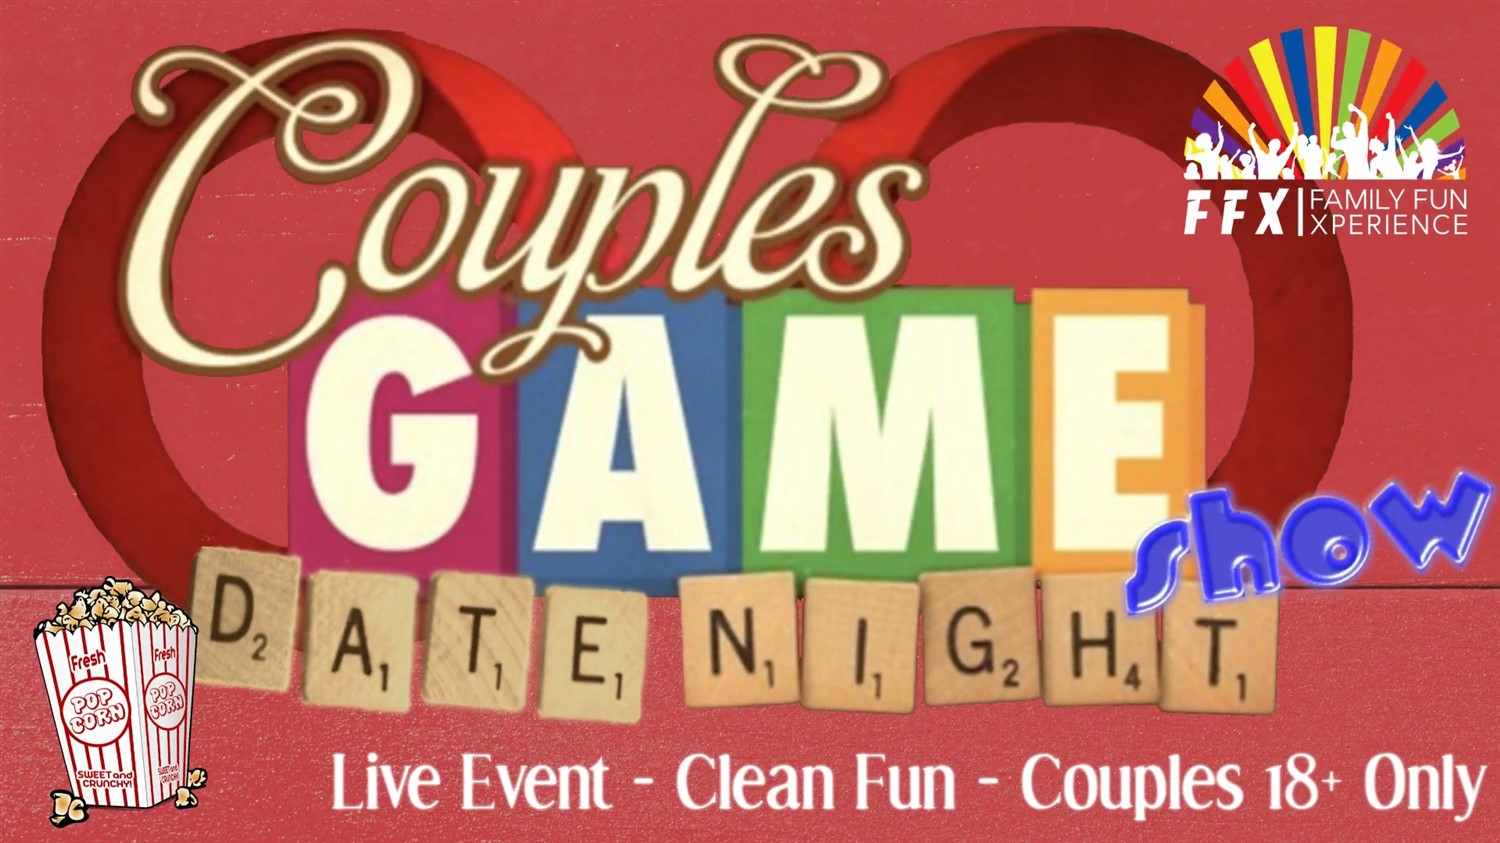 Couples Date Night Game Show! Live - Couples Only - FUN! on sep. 15, 19:00@FFX Theatre - Pick a seat, Buy tickets and Get information on Family Fun Xperience tickets.ffxshow.org